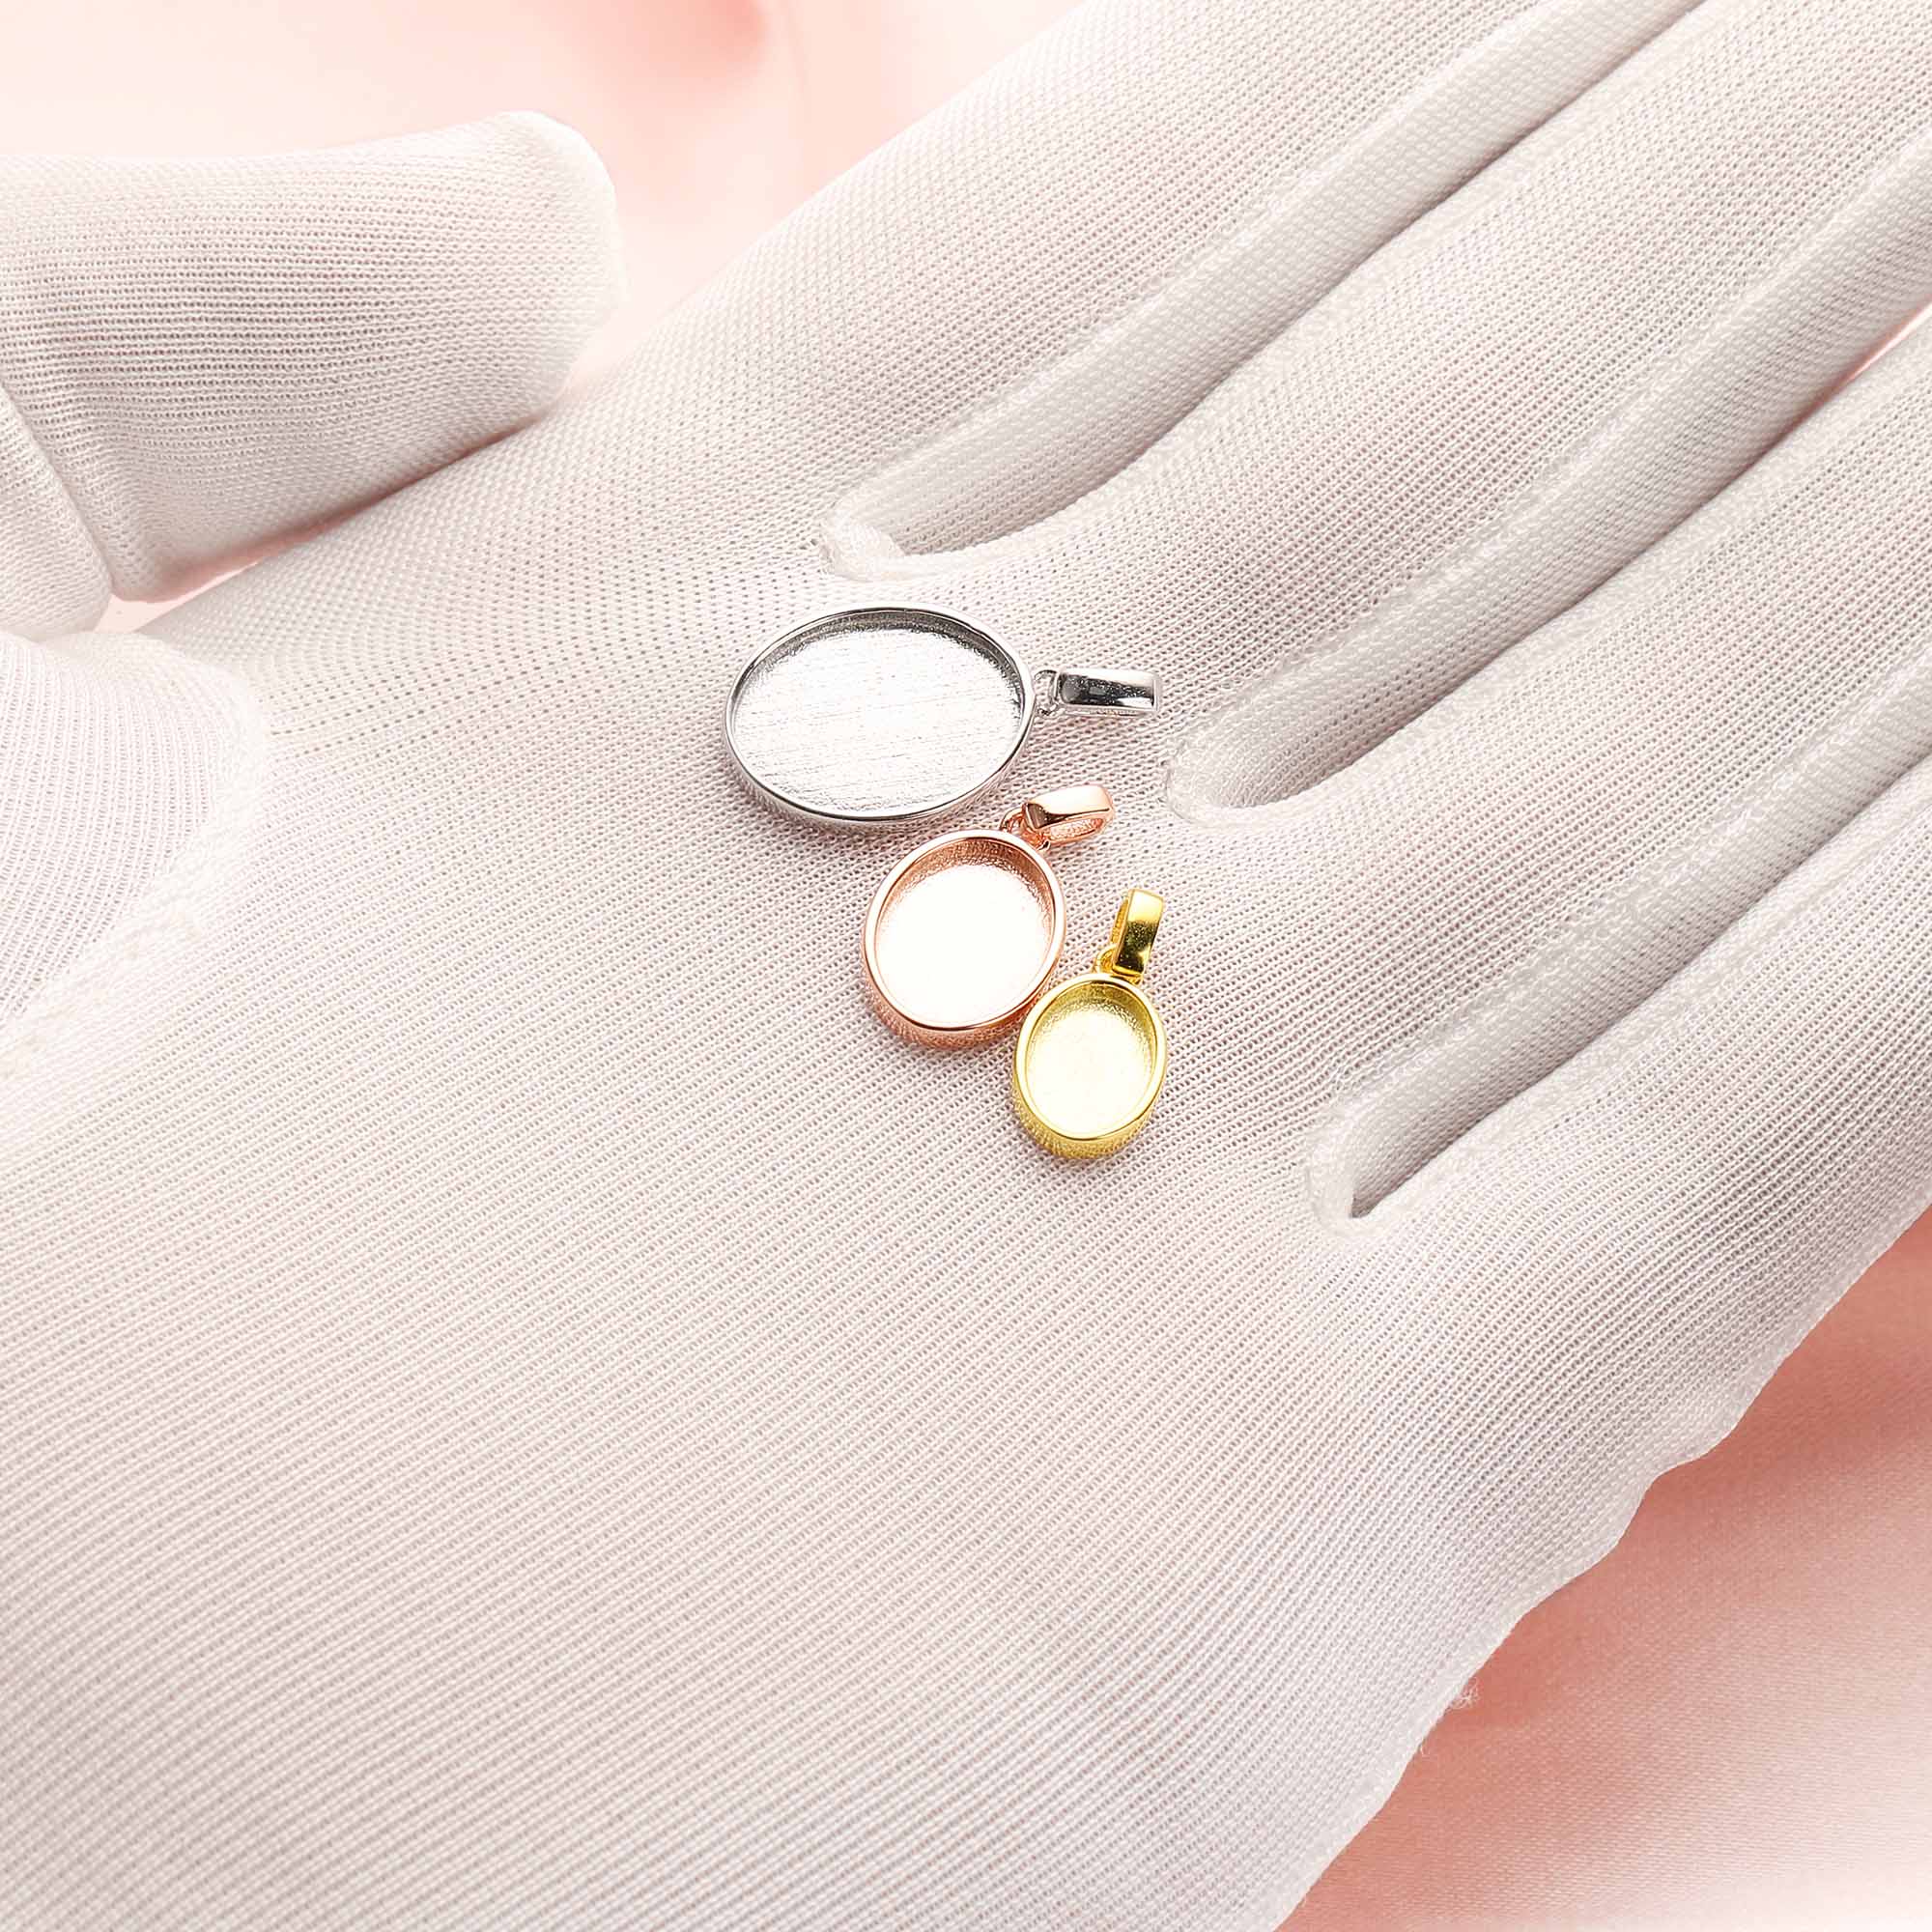 Keepsake Breast Milk Oval Solid Back Pendant Bezel Settings,Solid 14K 18K Gold Charm,DIY Memory Jewelry Supplies 1421205 - Click Image to Close